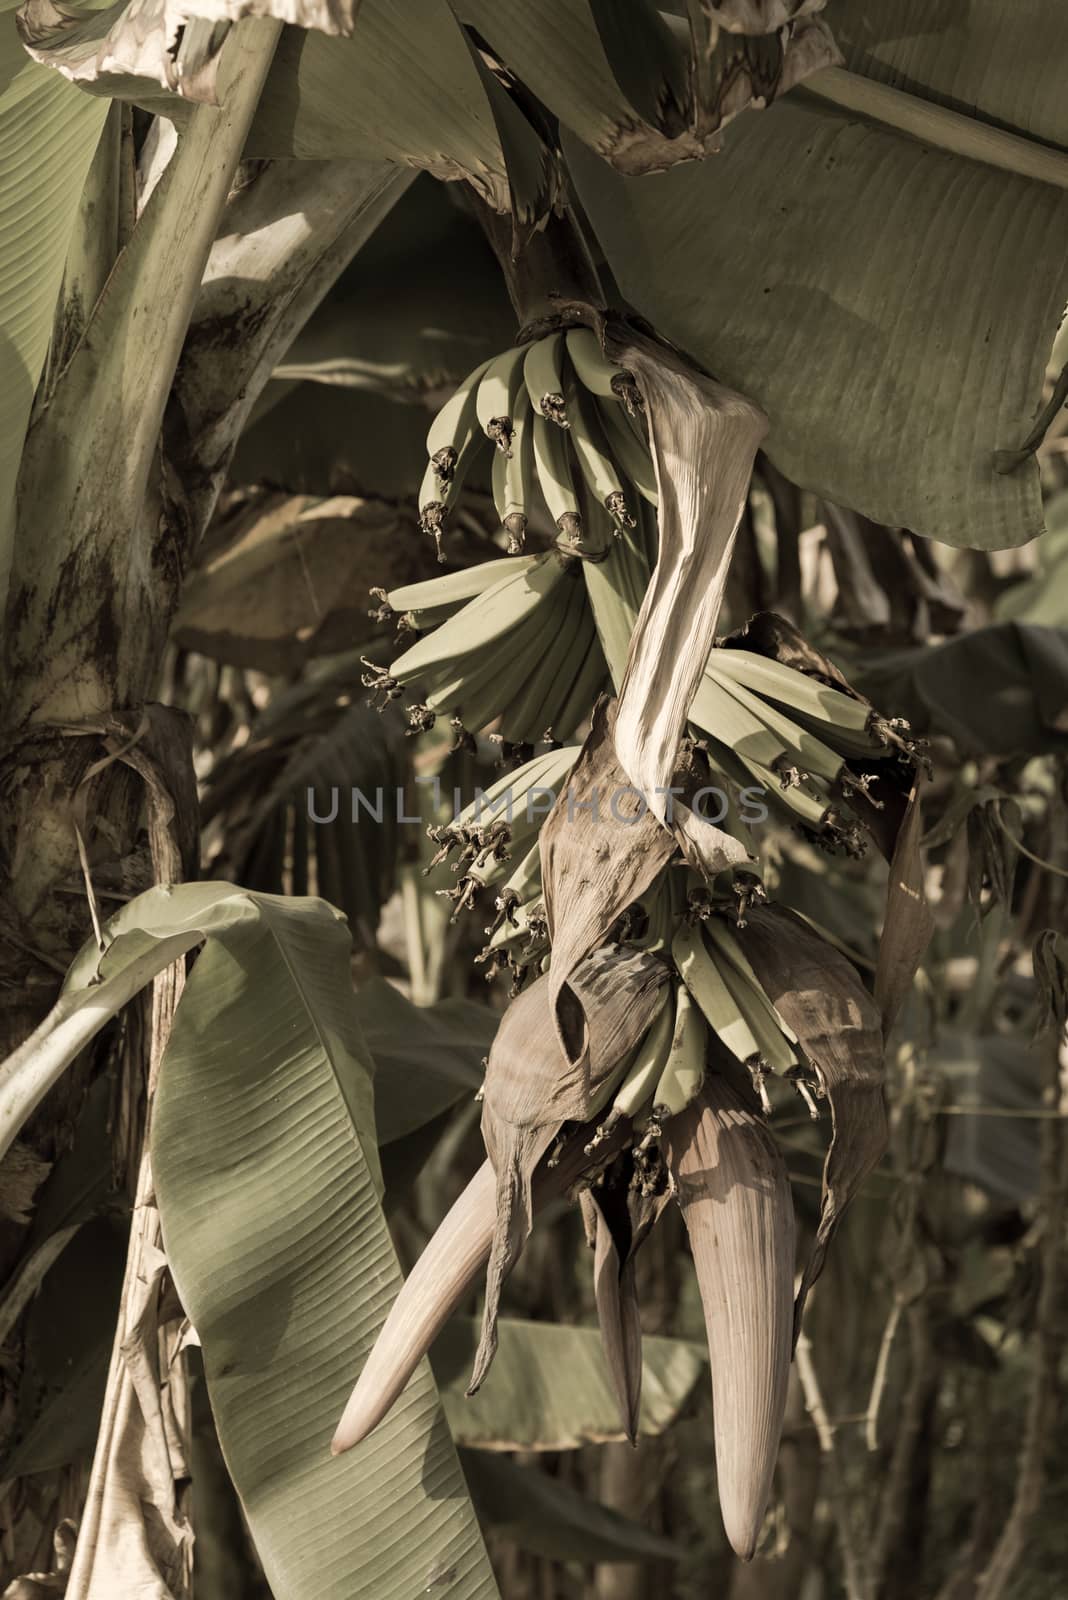 Filtered image young banana with flower on tree at the organic farm in countryside Vietnam by trongnguyen